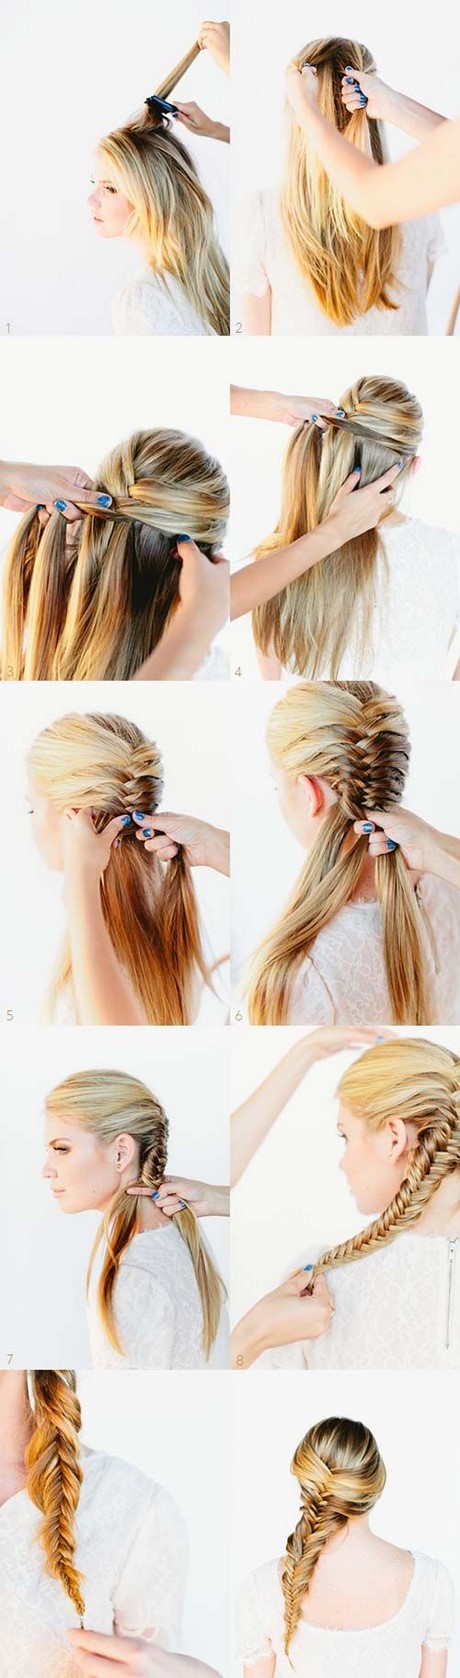 ideas-for-braided-hairstyles-79_17 Ideas for braided hairstyles